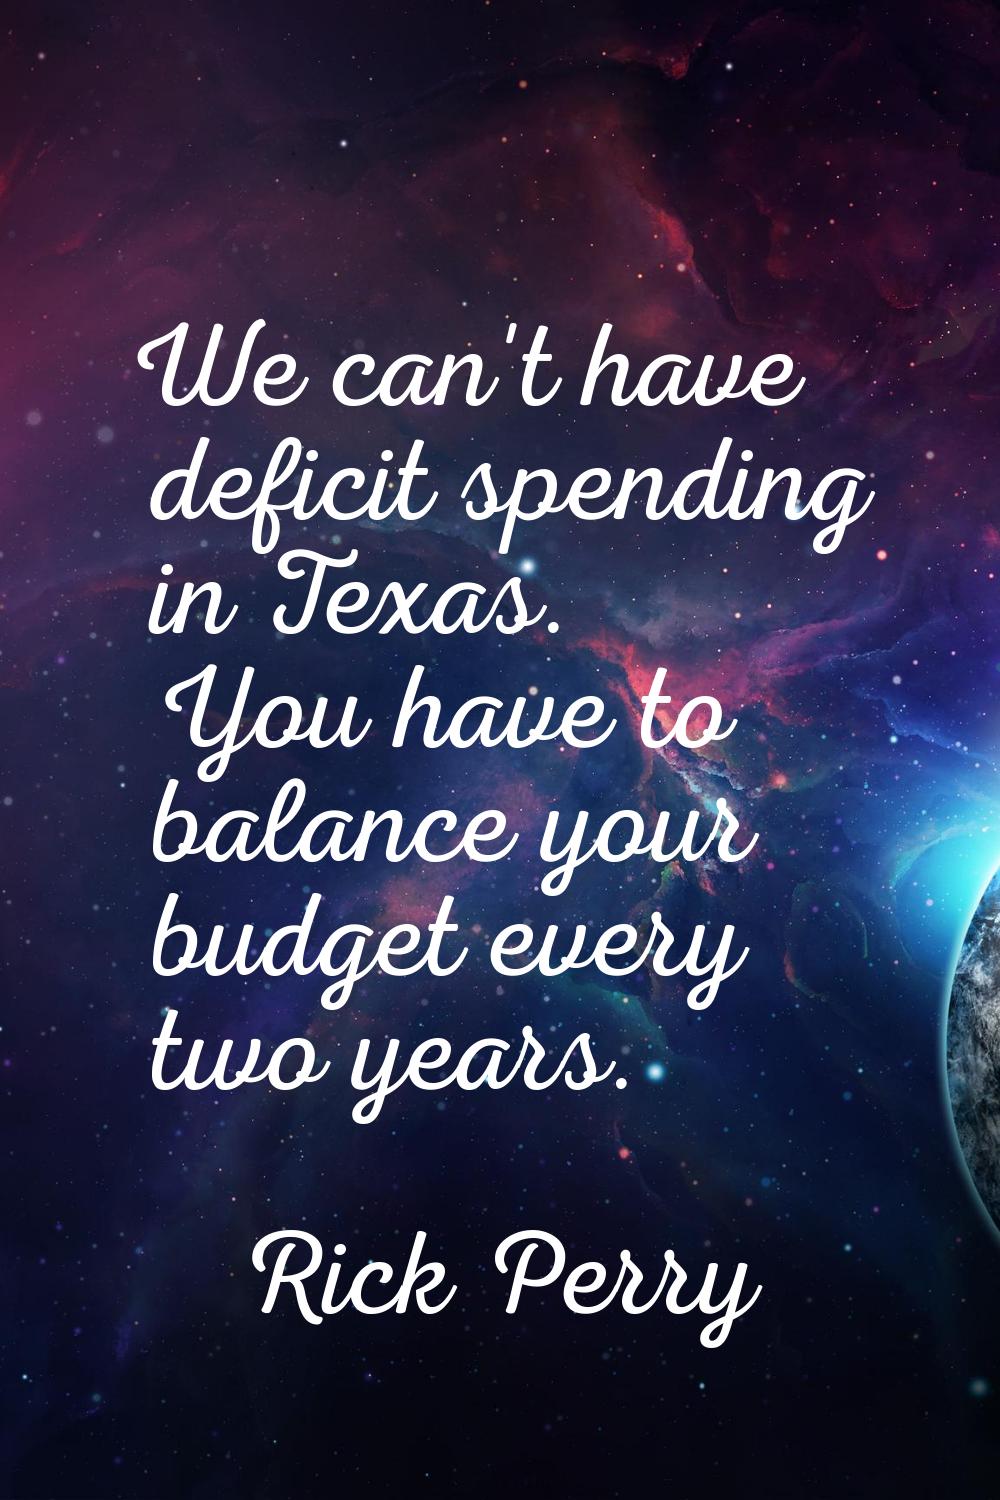 We can't have deficit spending in Texas. You have to balance your budget every two years.